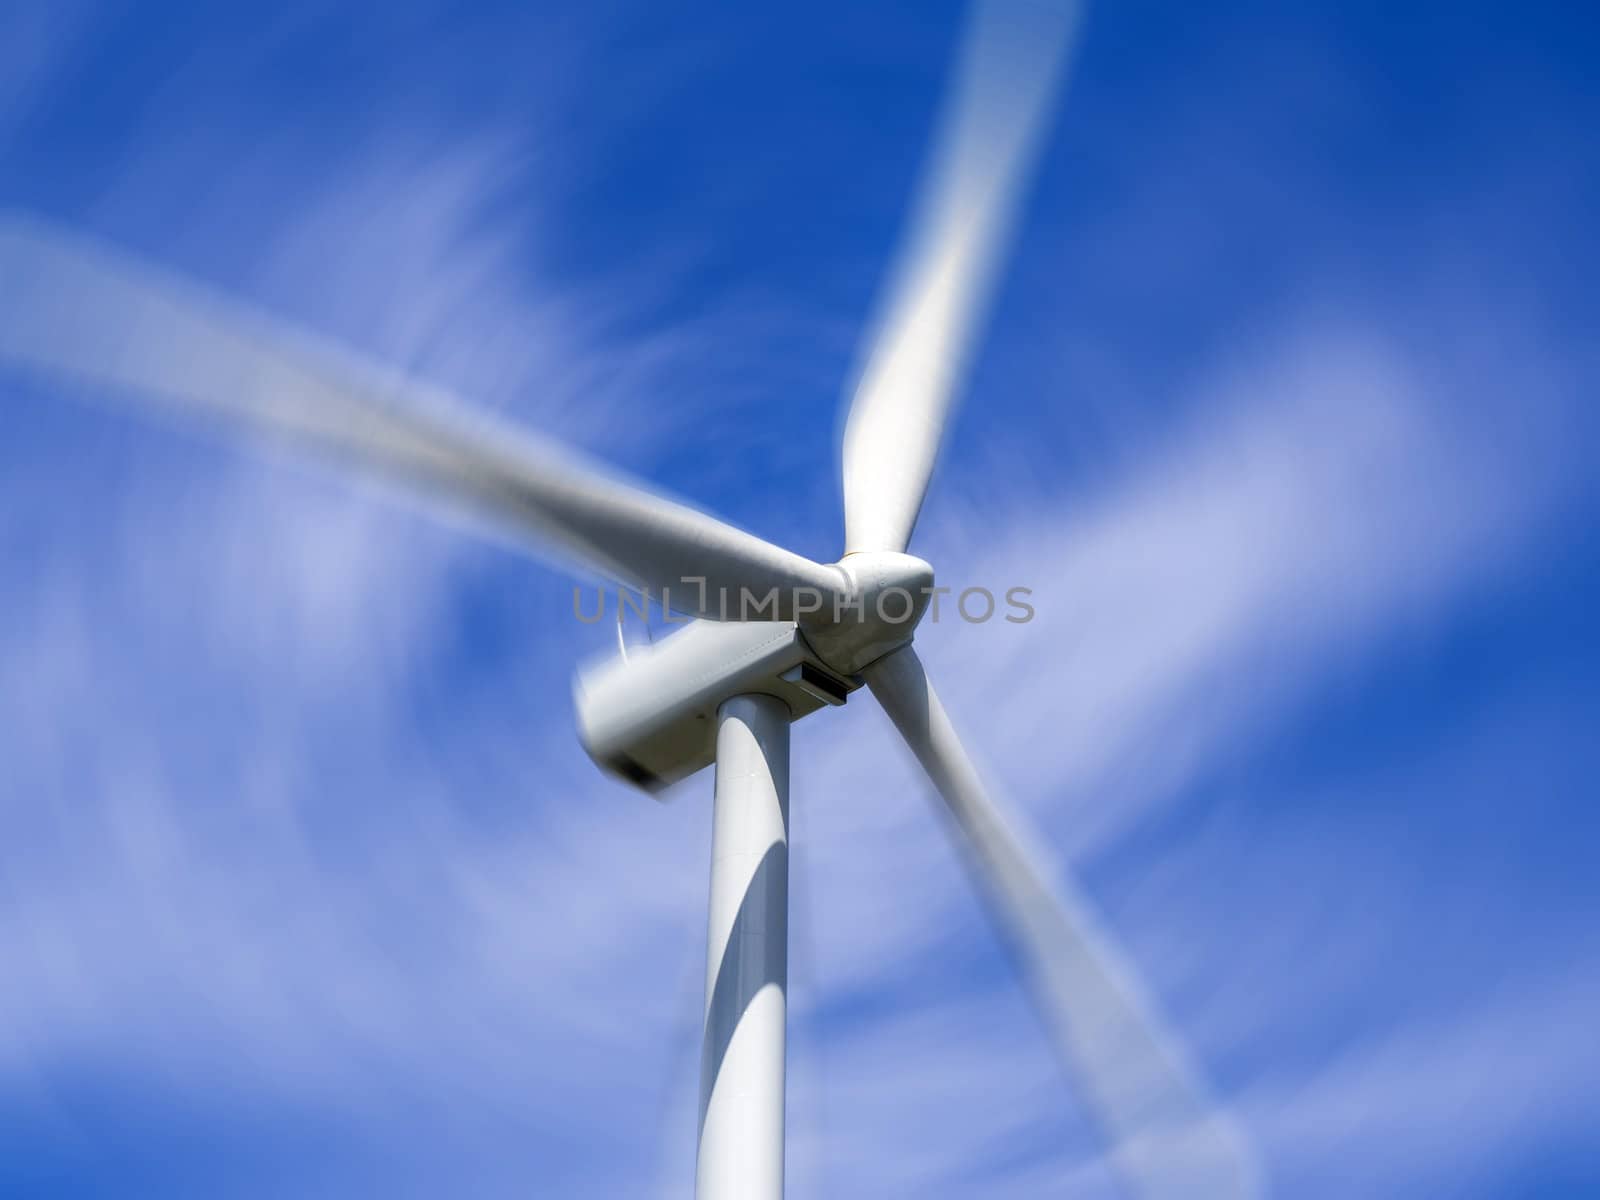 close up of wind turbine propeller in motion